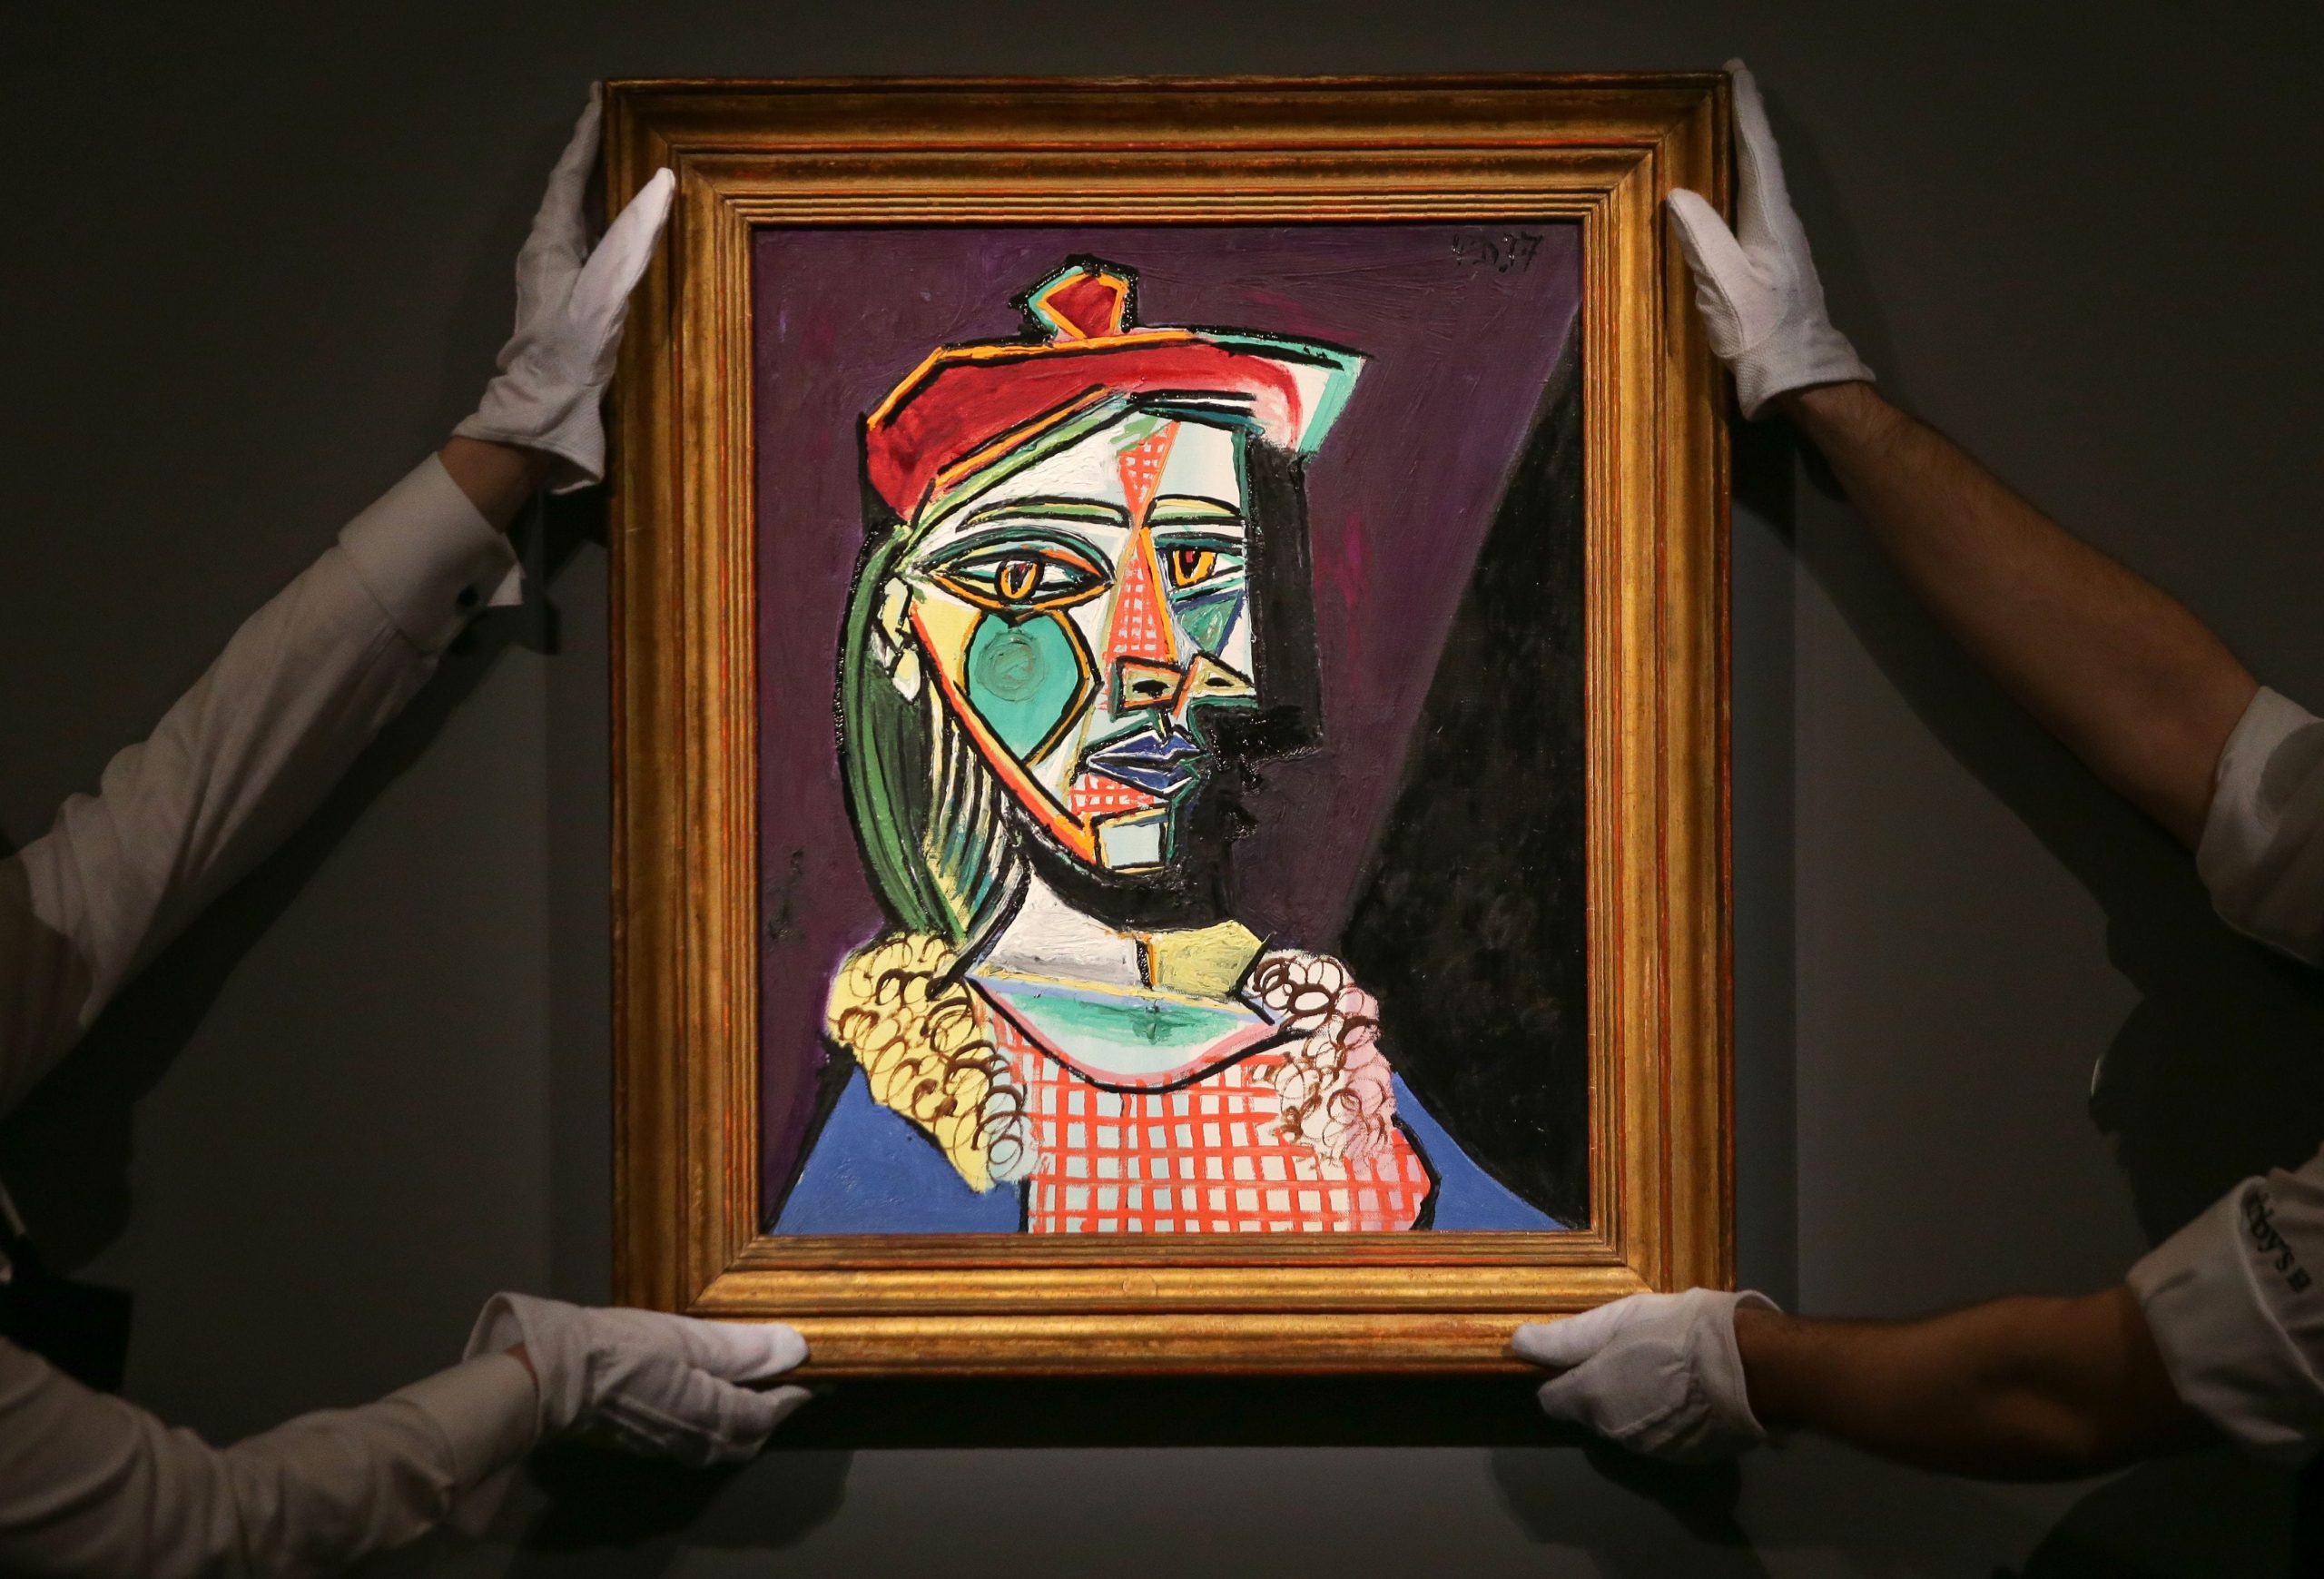 Gallery assistants hold an artwork by Spanish artist Pablo Picasso entitled 'Femme au beret et a la robe quadrillee' (Marie-Therese Walter) with an estimate price in the region of 35 million pounds, (50 million dollars), during a photocall at Sotheby's in central London on February 22, 2018